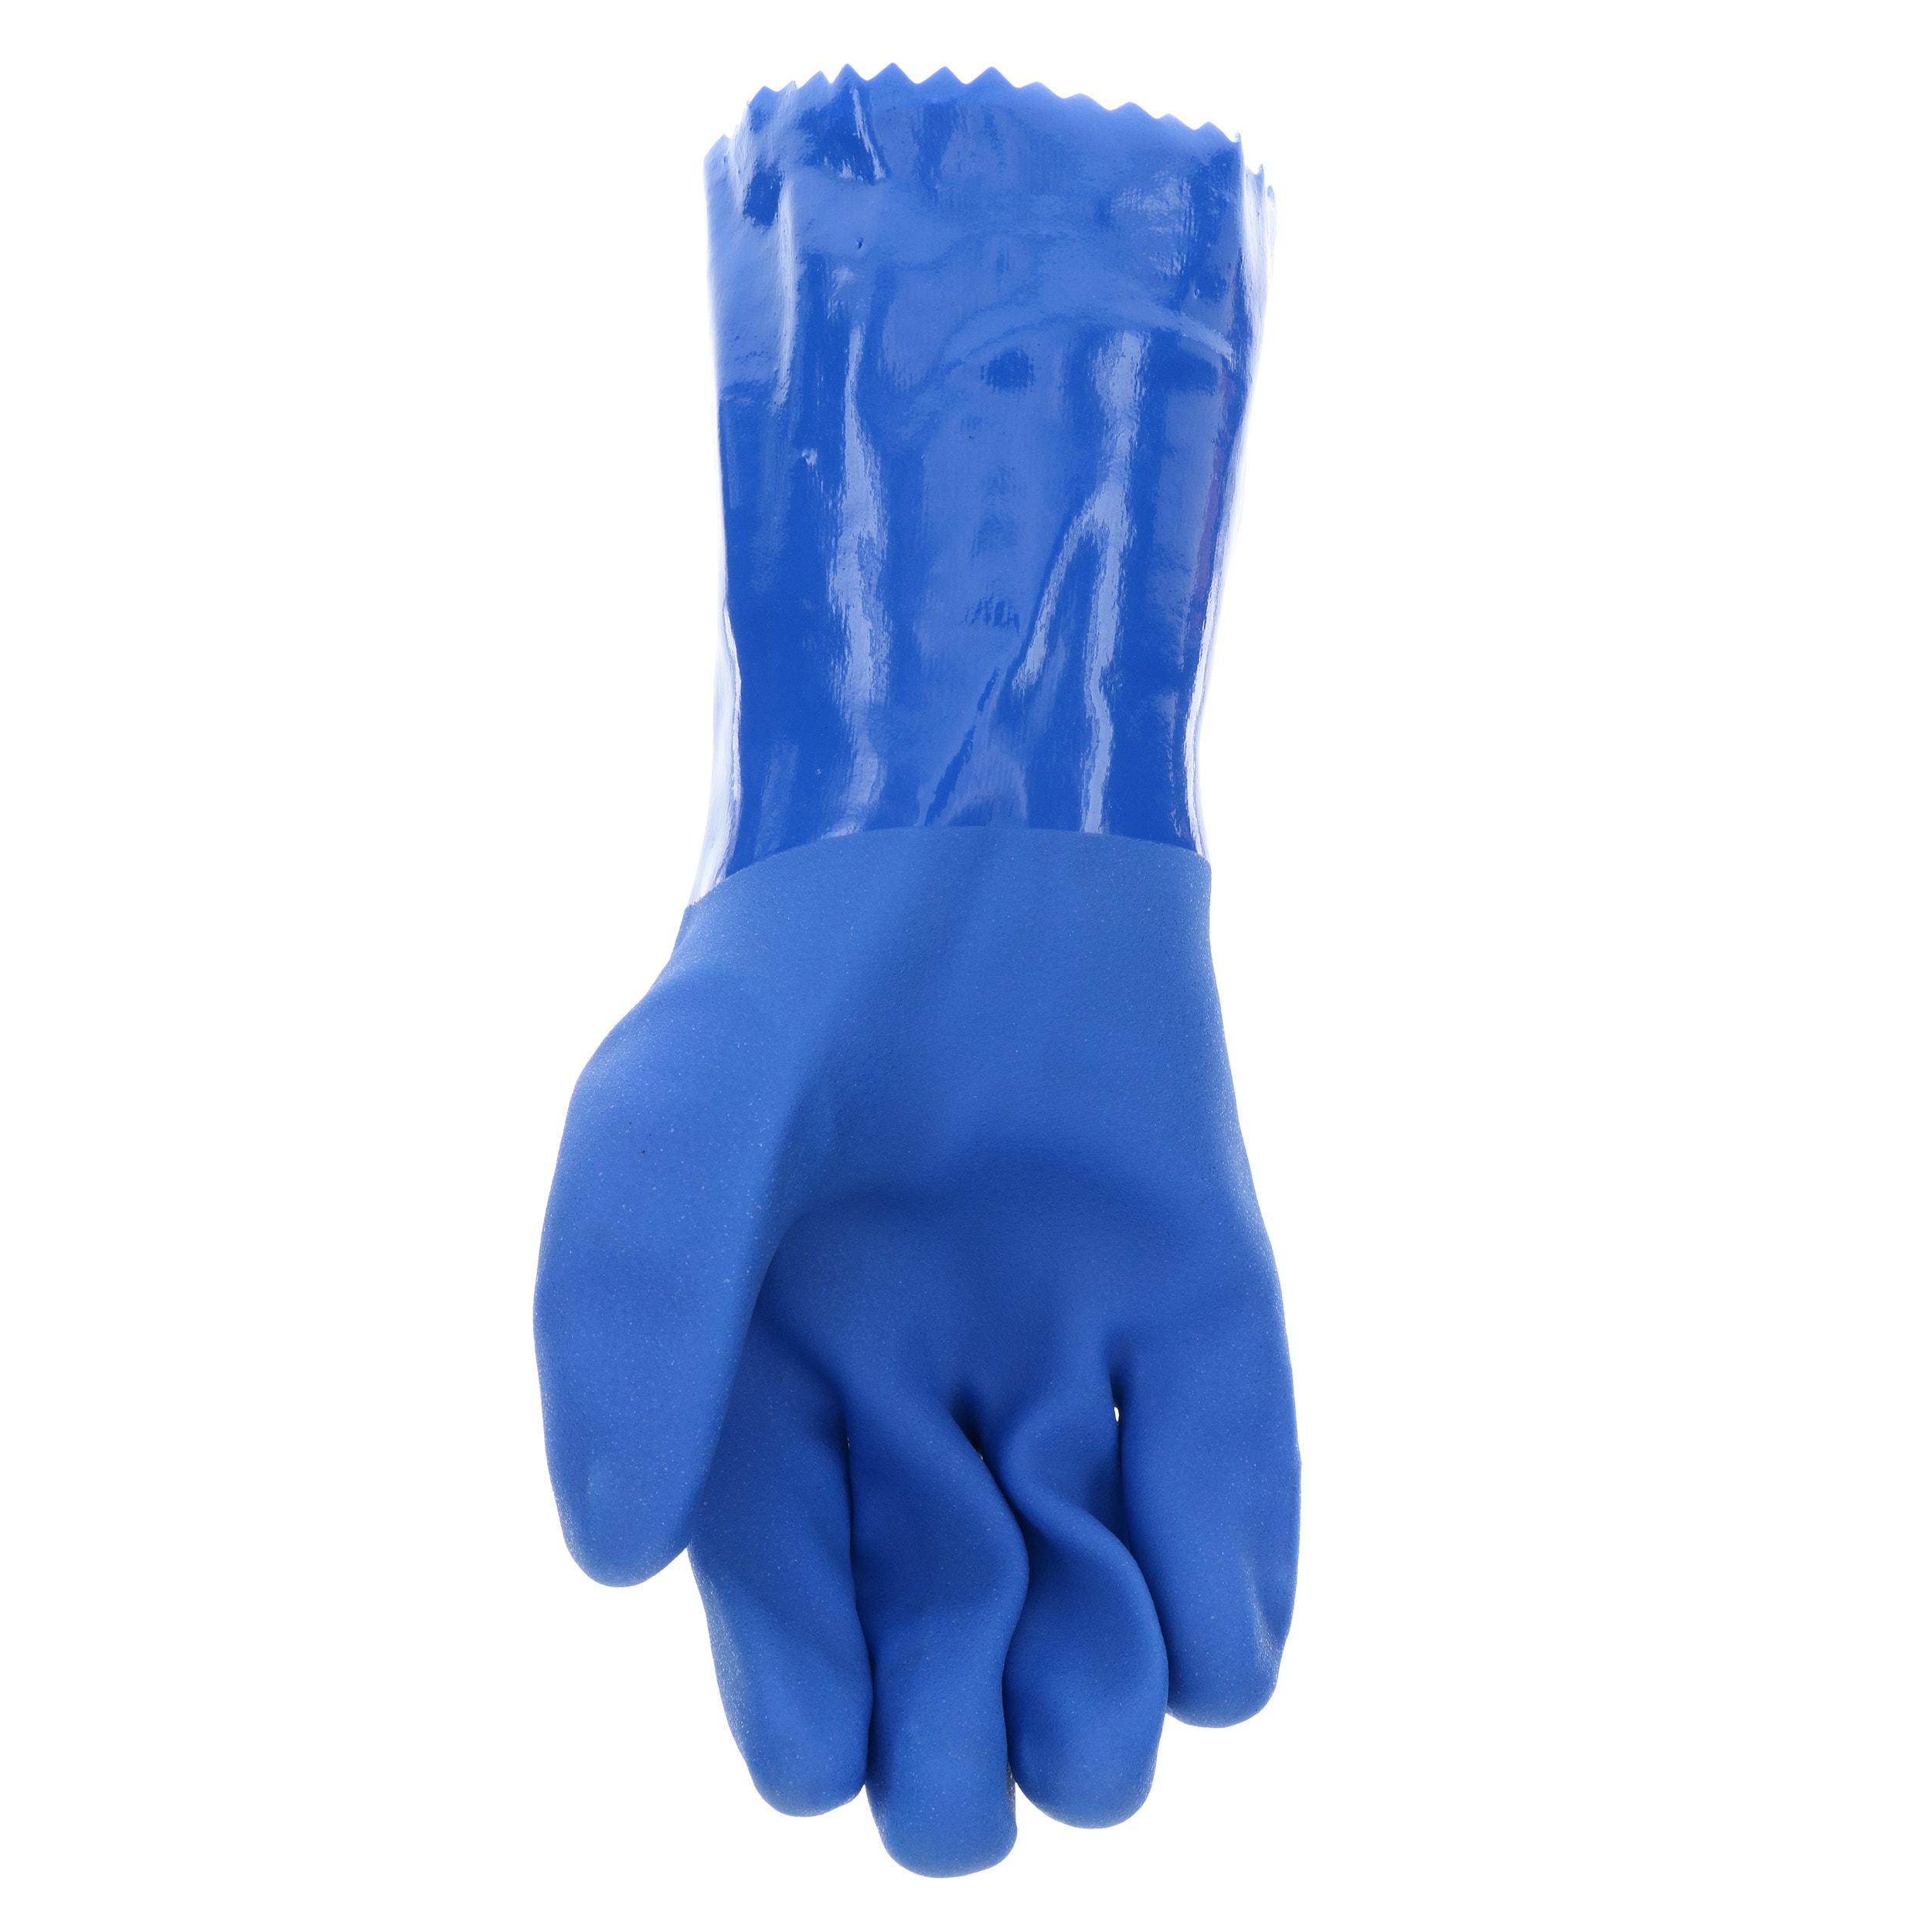 Blue Rhino Black PVC Gloves in the Work Gloves department at